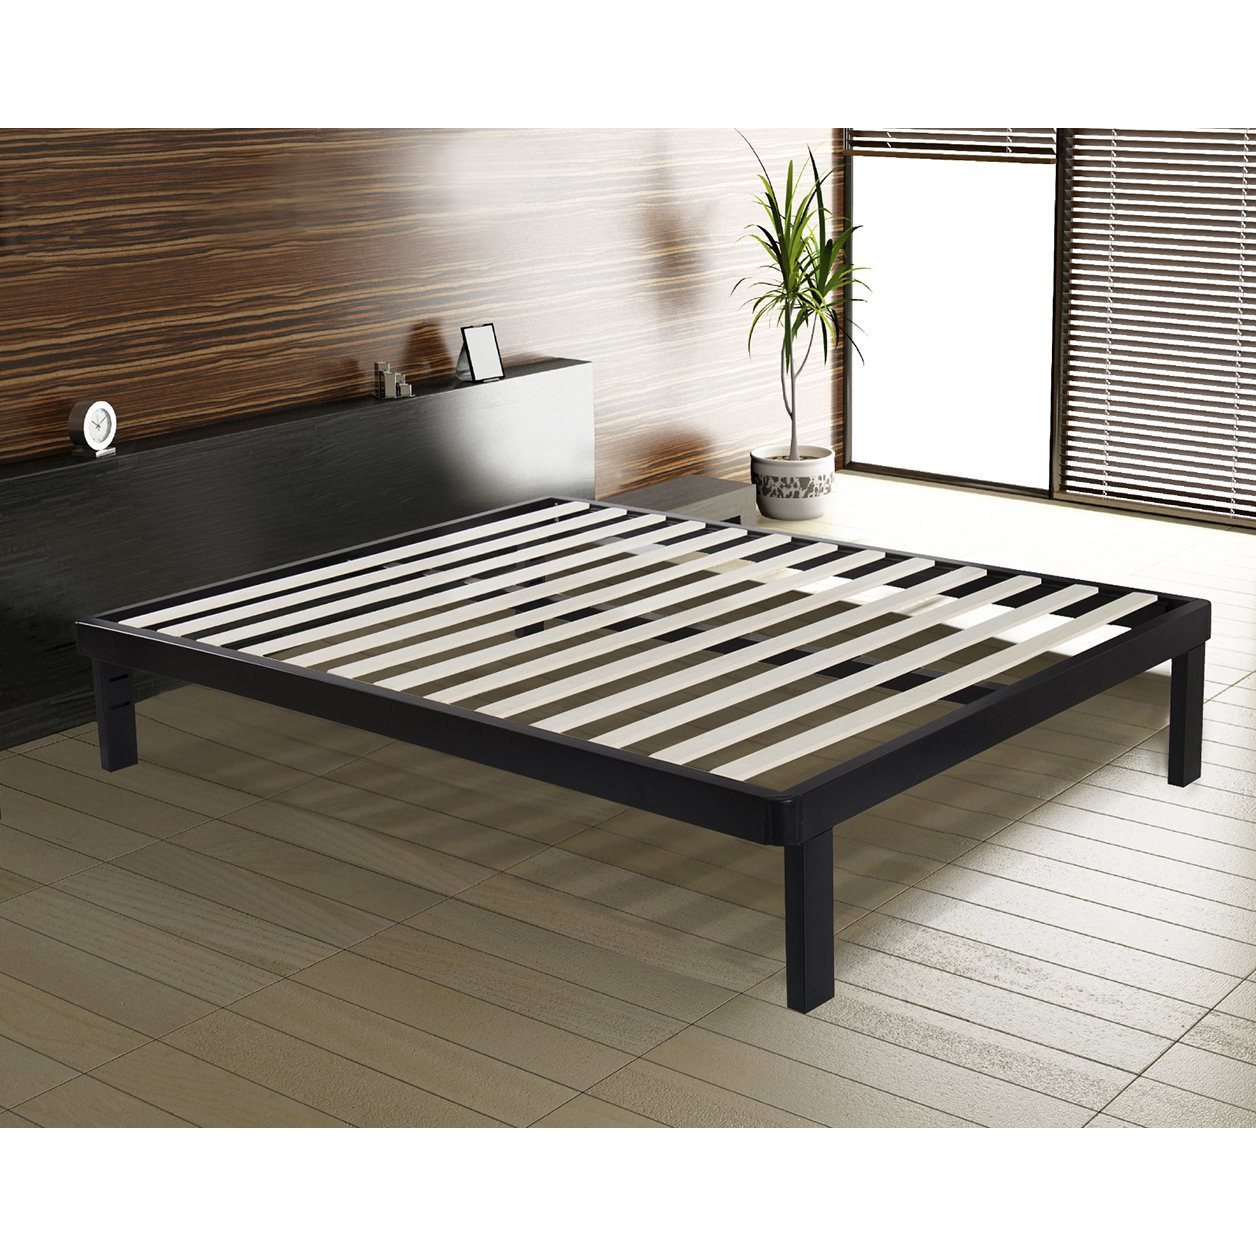 GreenHome123 Modern Euro Asian Style Metal Platform Bed Frame with Wood Slats in Twin Full Queen King